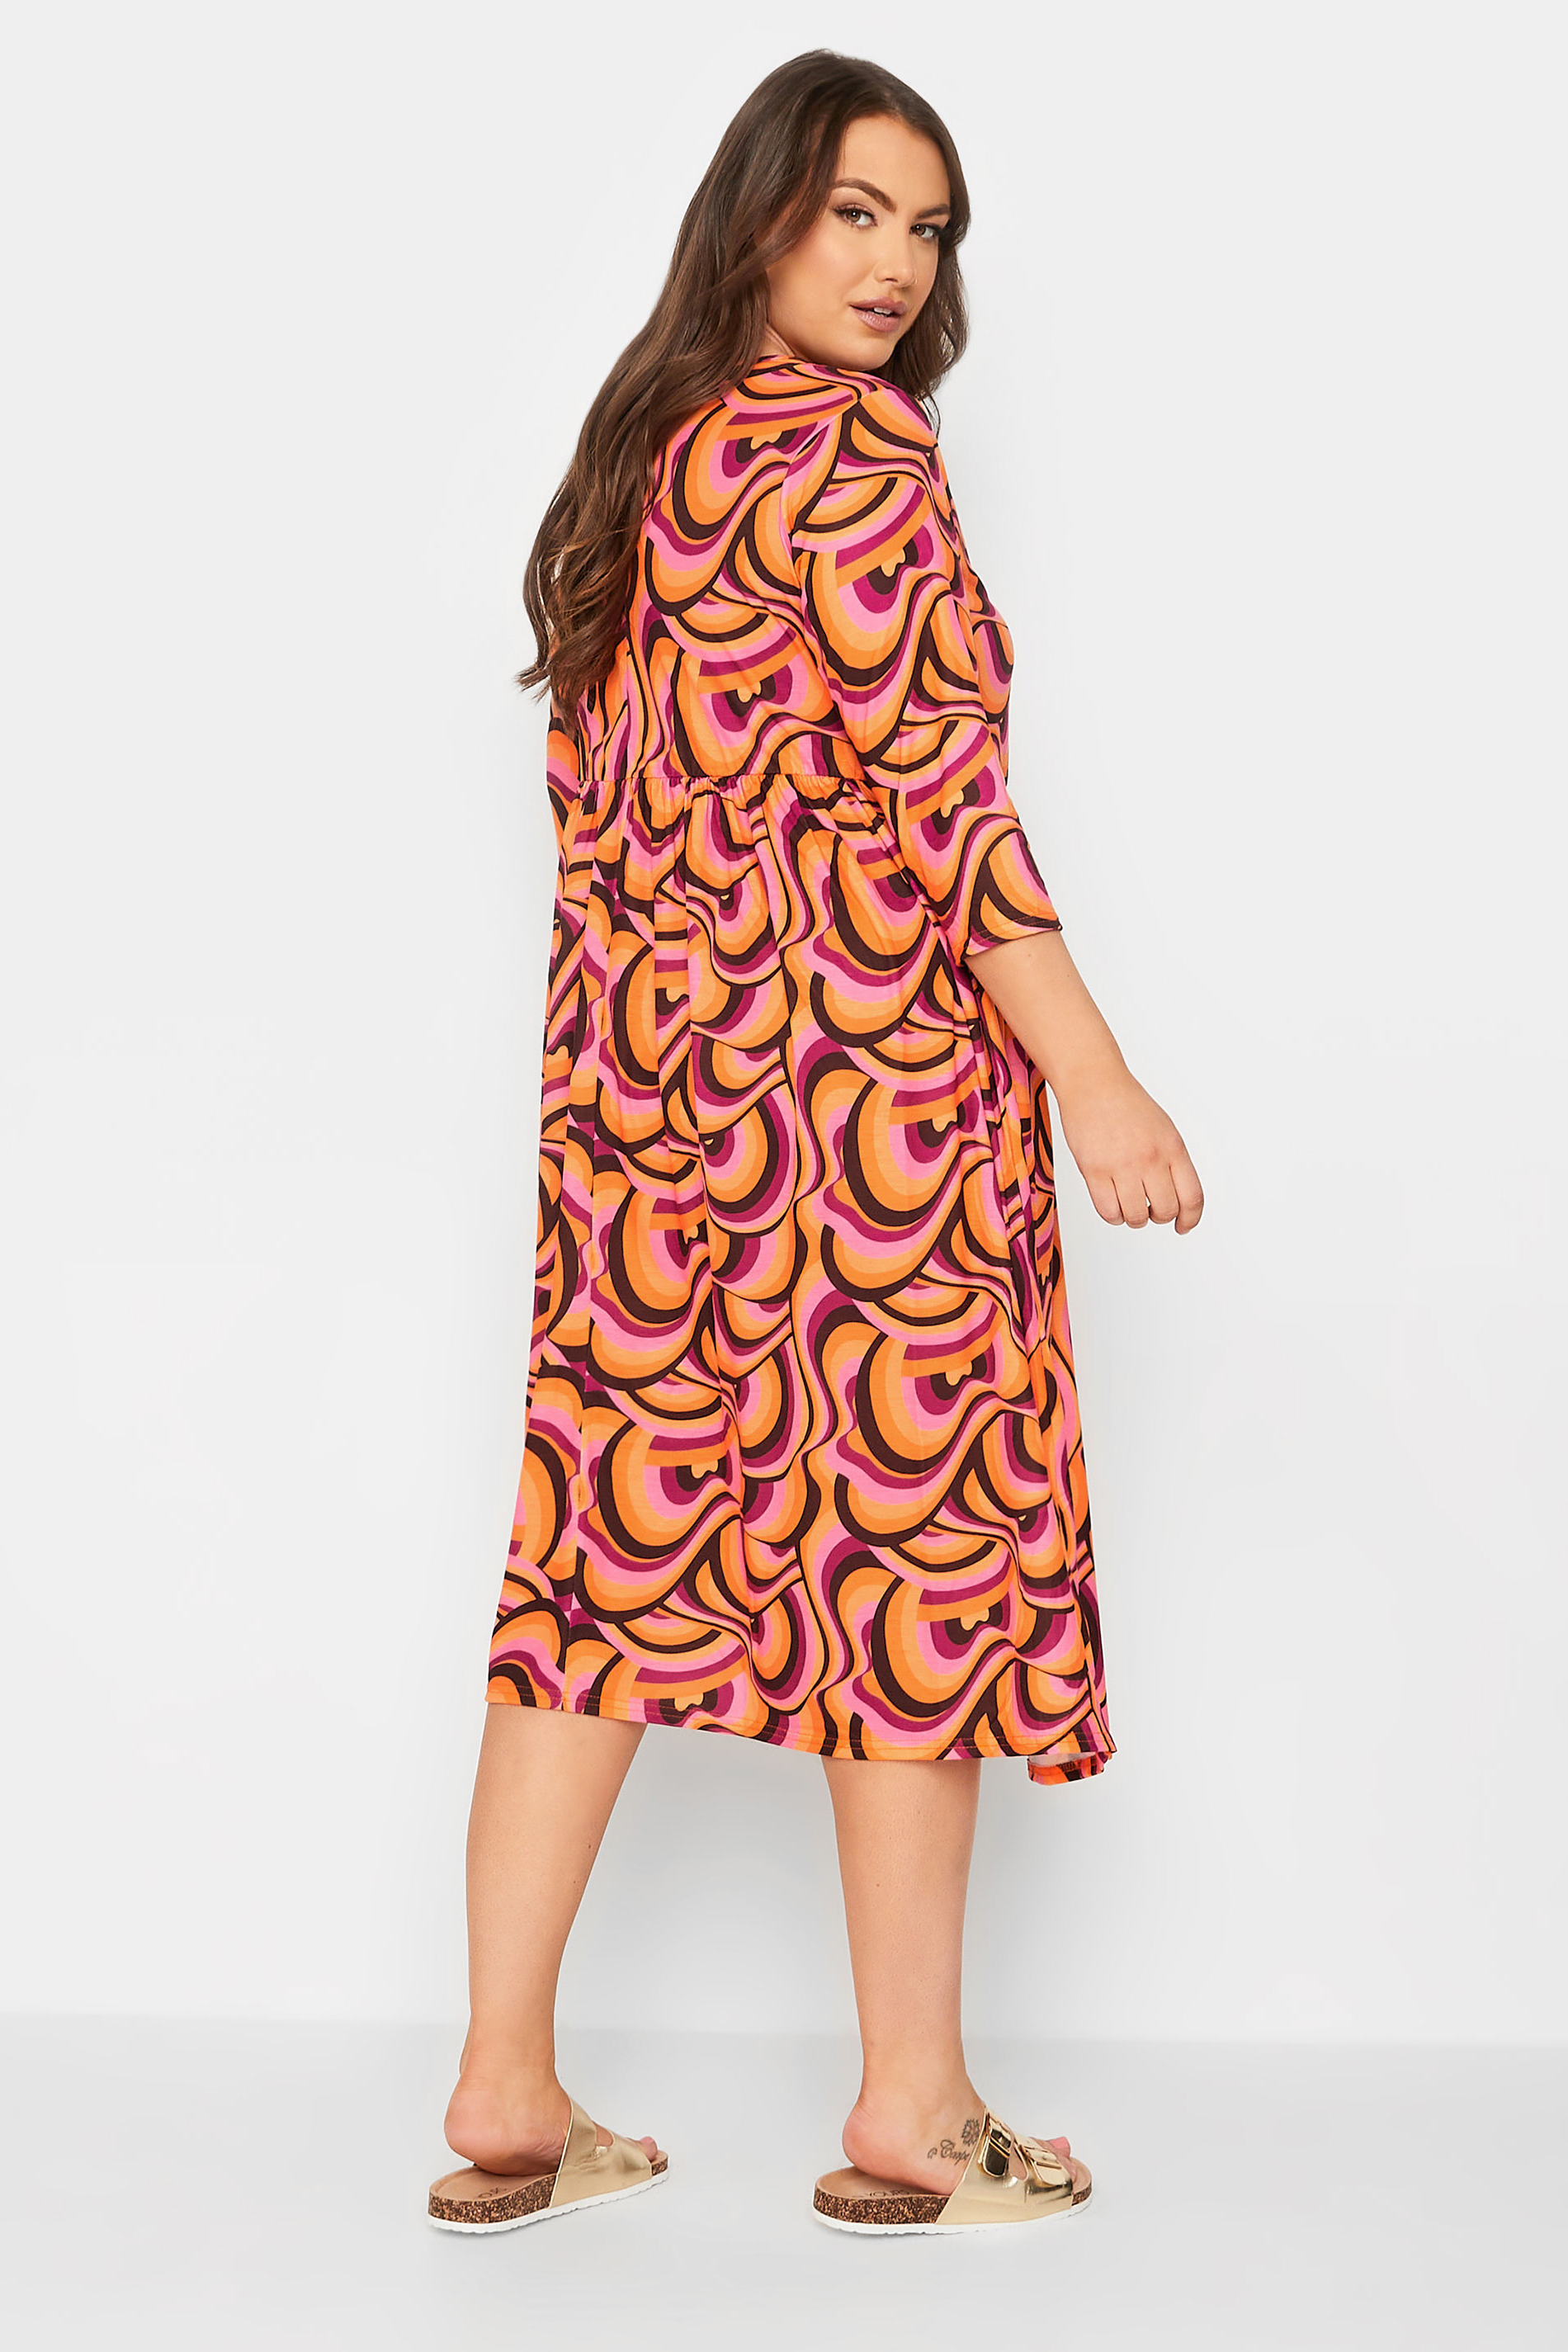 LIMITED COLLECTION Plus Size Orange Swirl Print Dress | Yours Clothing  3